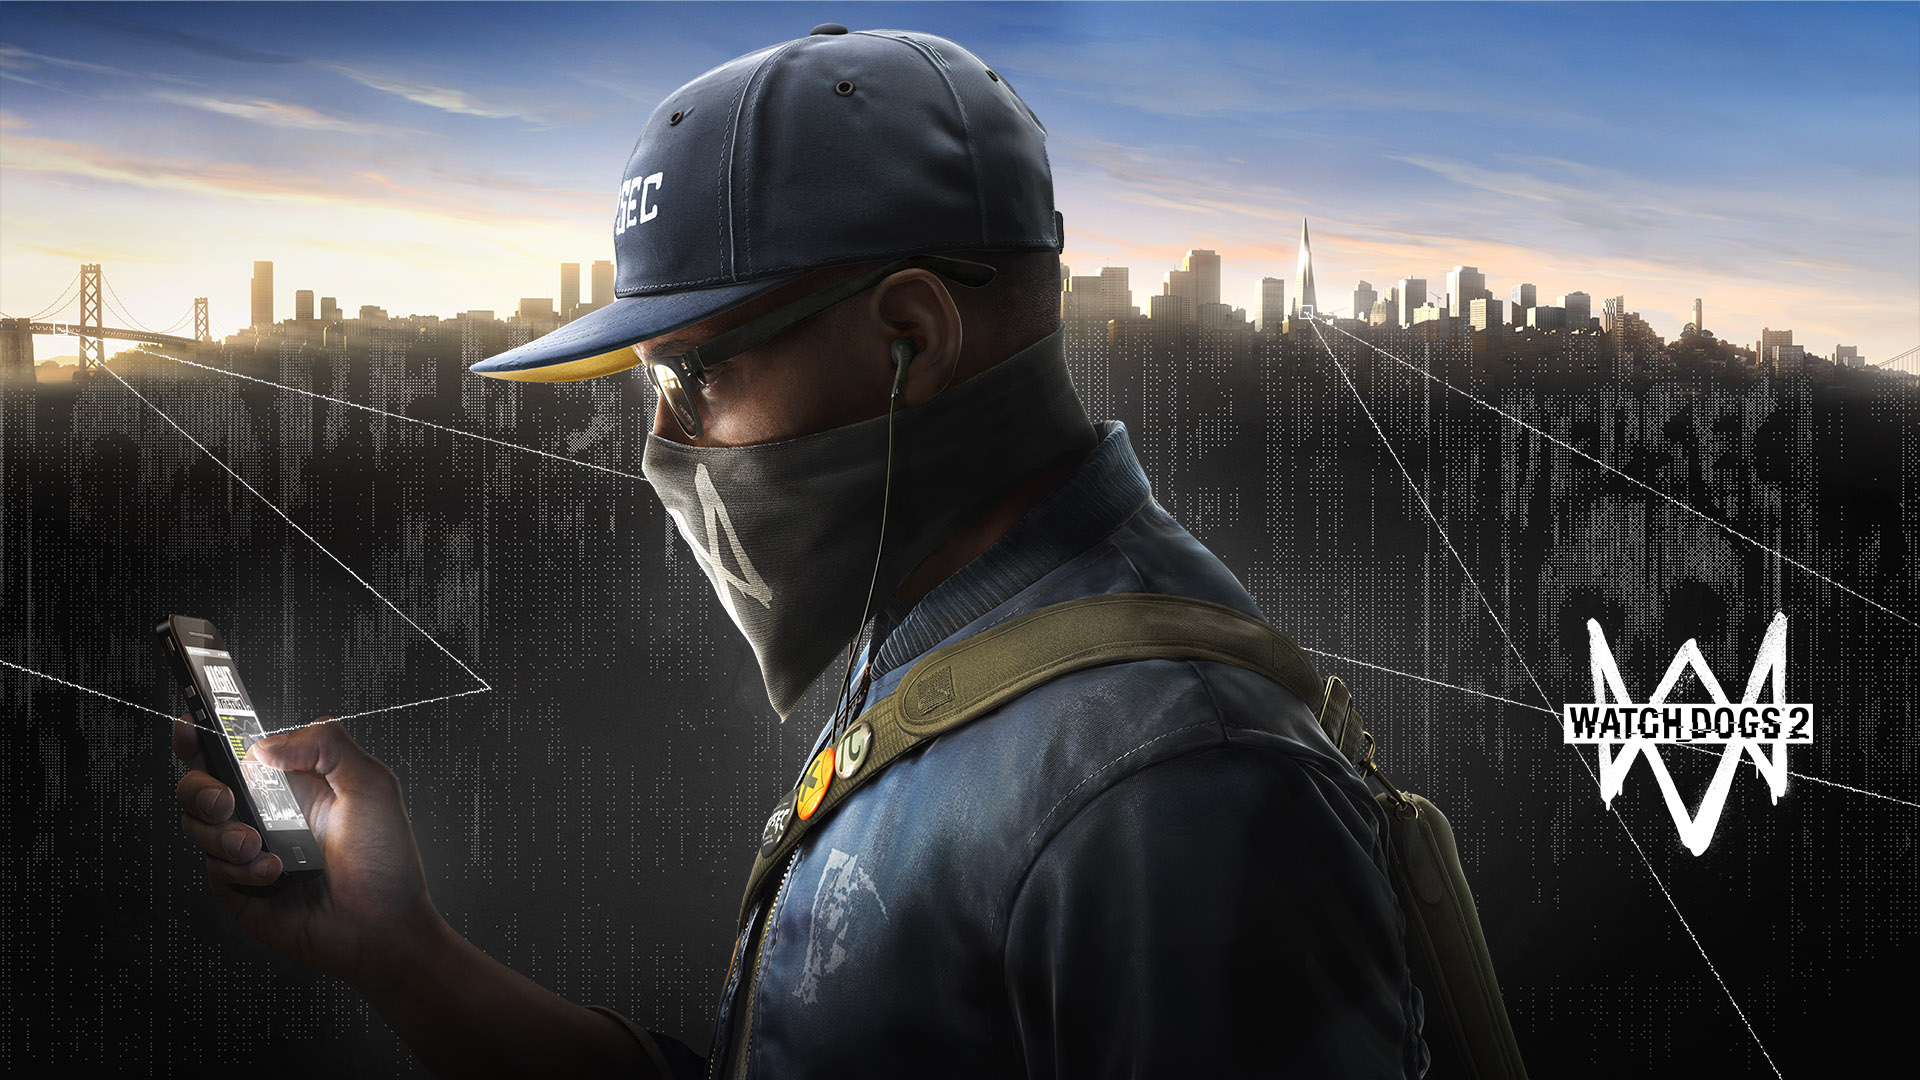 Watch Dogs 2 Wallpapers Video Game Hq Watch Dogs 2 Pictures 4k Wallpapers 19